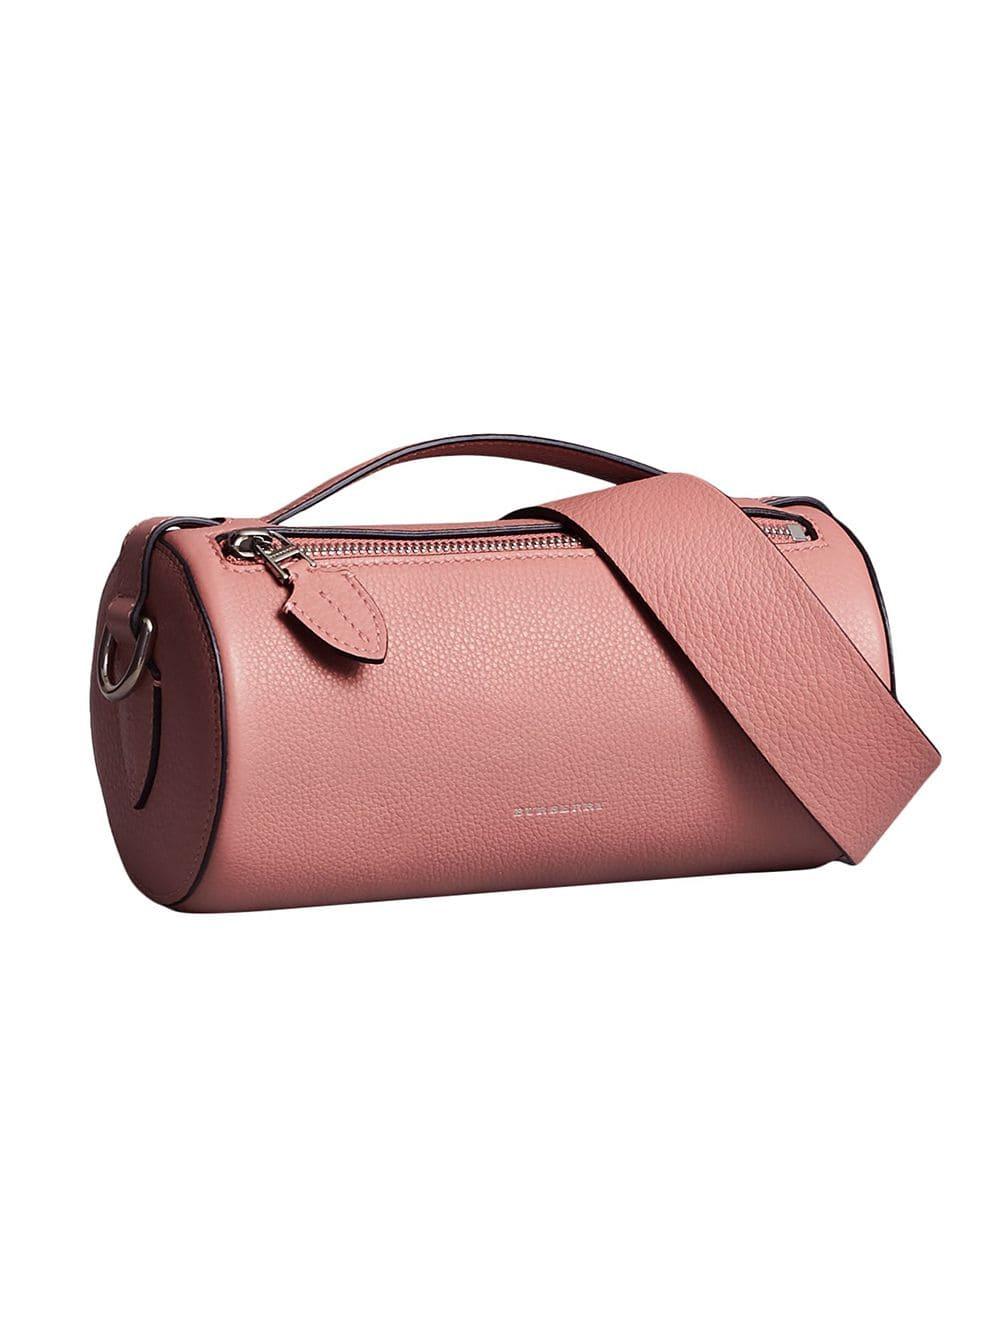 Burberry The Leather Barrel Bag in Pink | Lyst